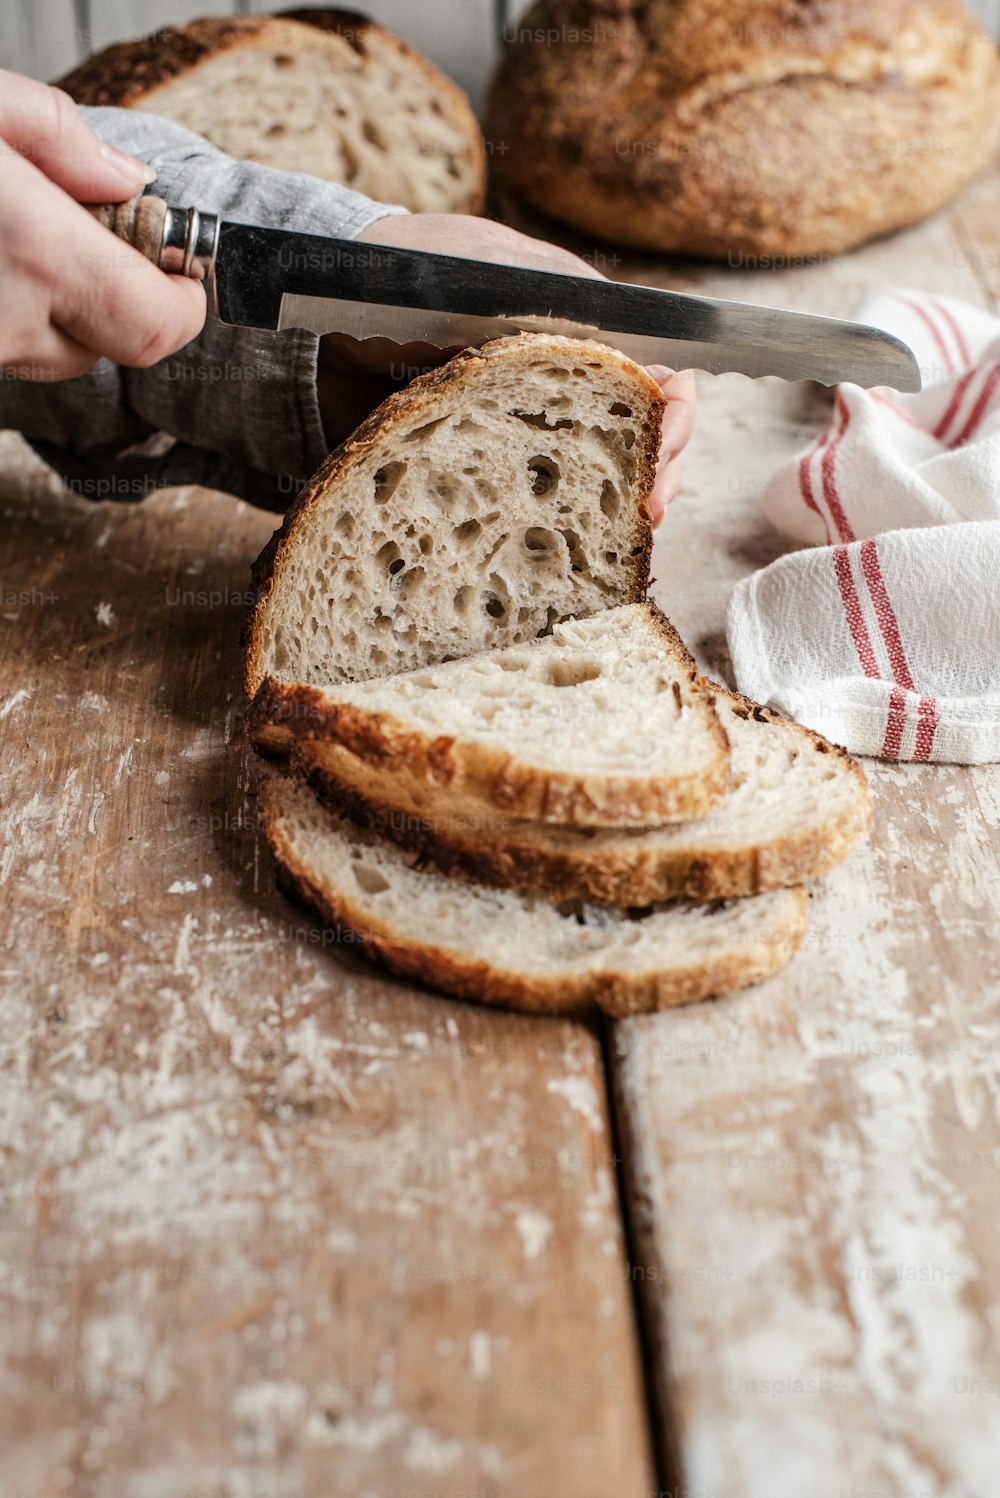 a person cutting a loaf of bread with a knife